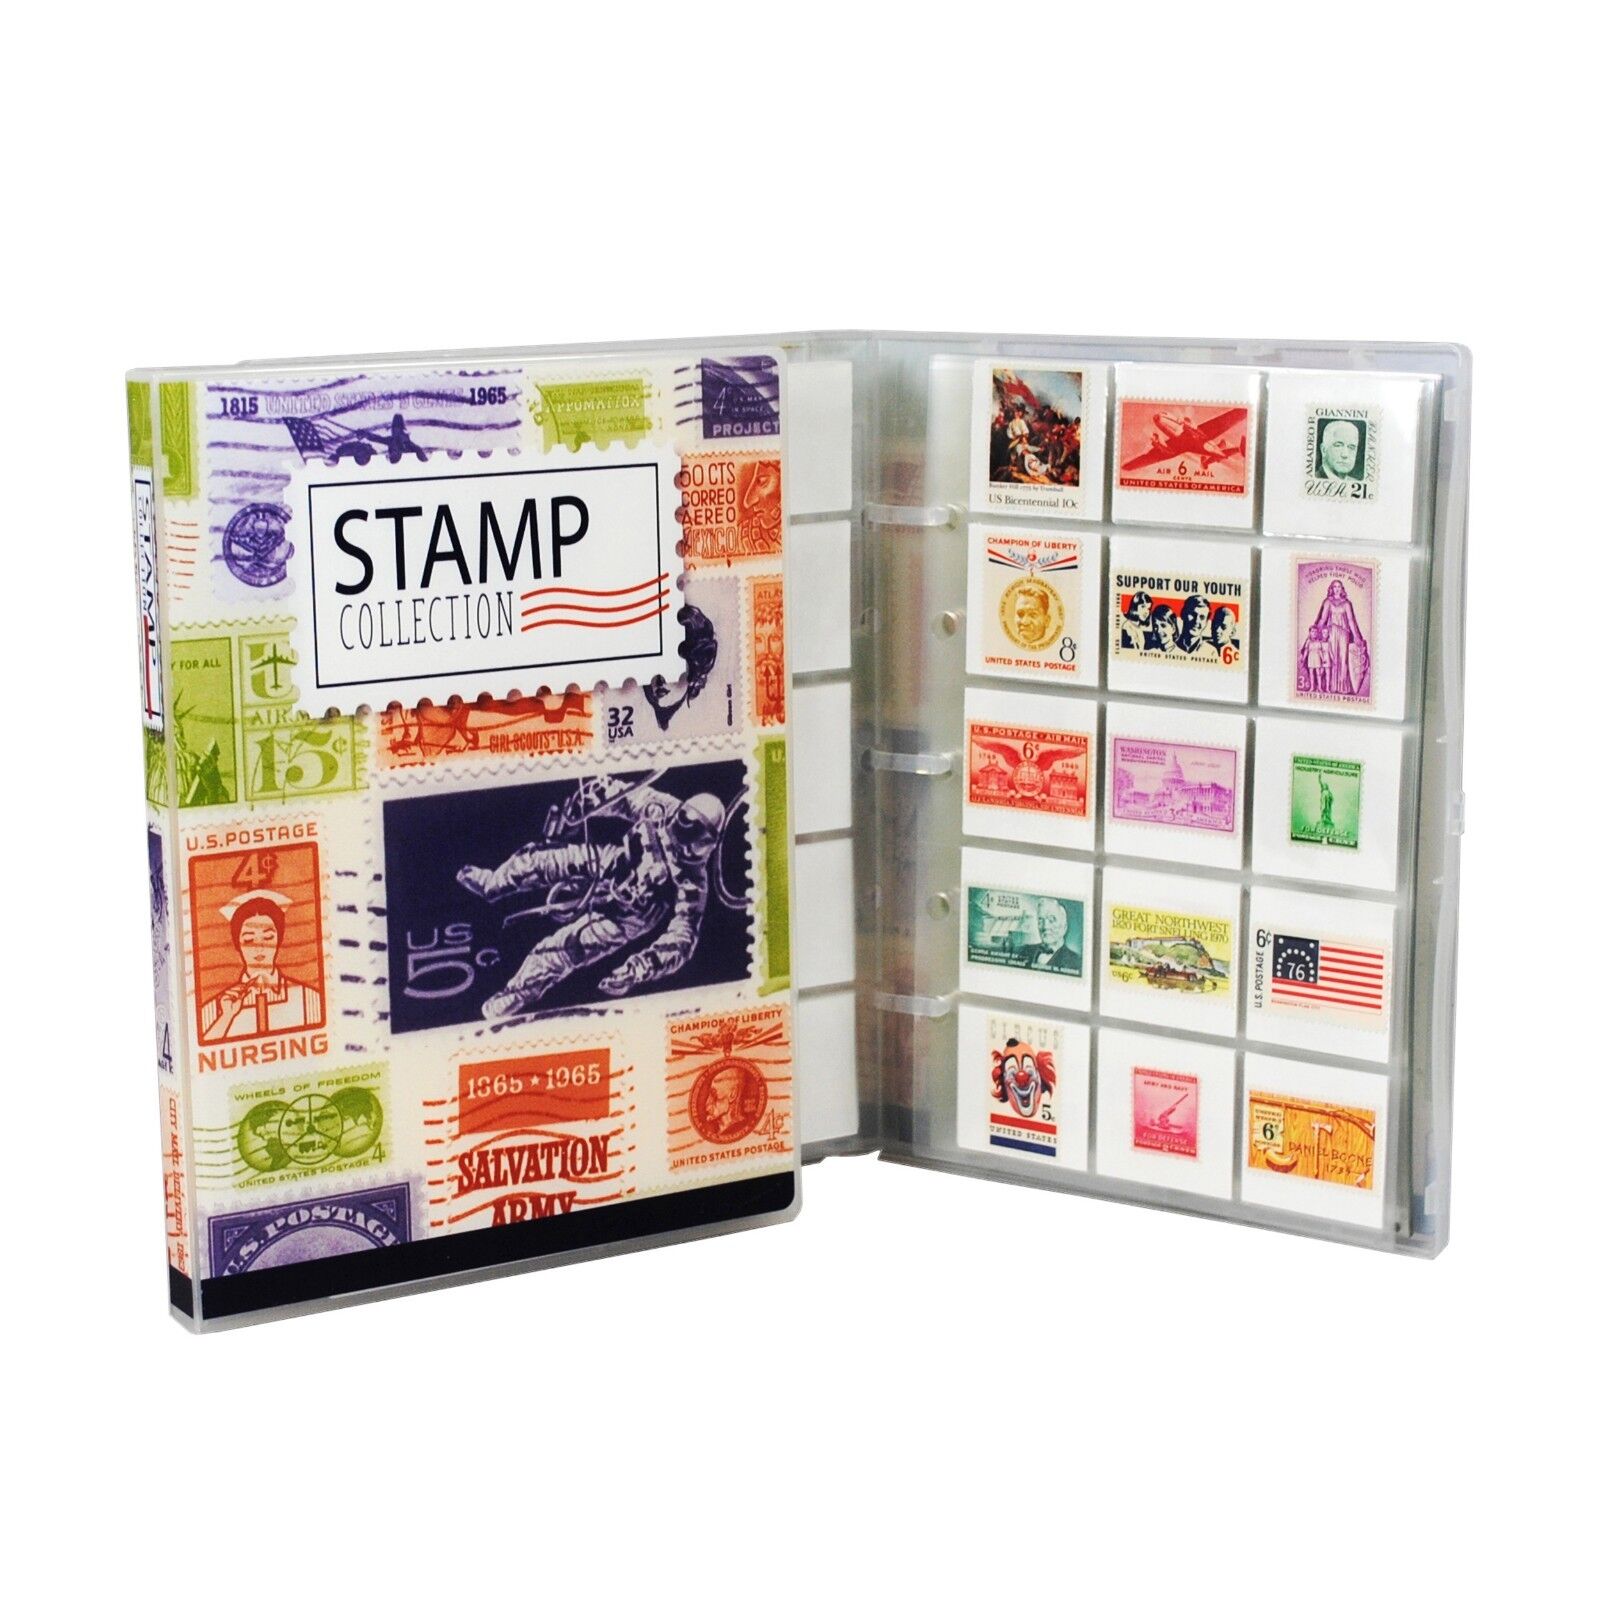 Stamp Collection Kit/Album, w/ 10 Pages, Holds 150-300 Stamps (No Stamps) UniKeep 17094